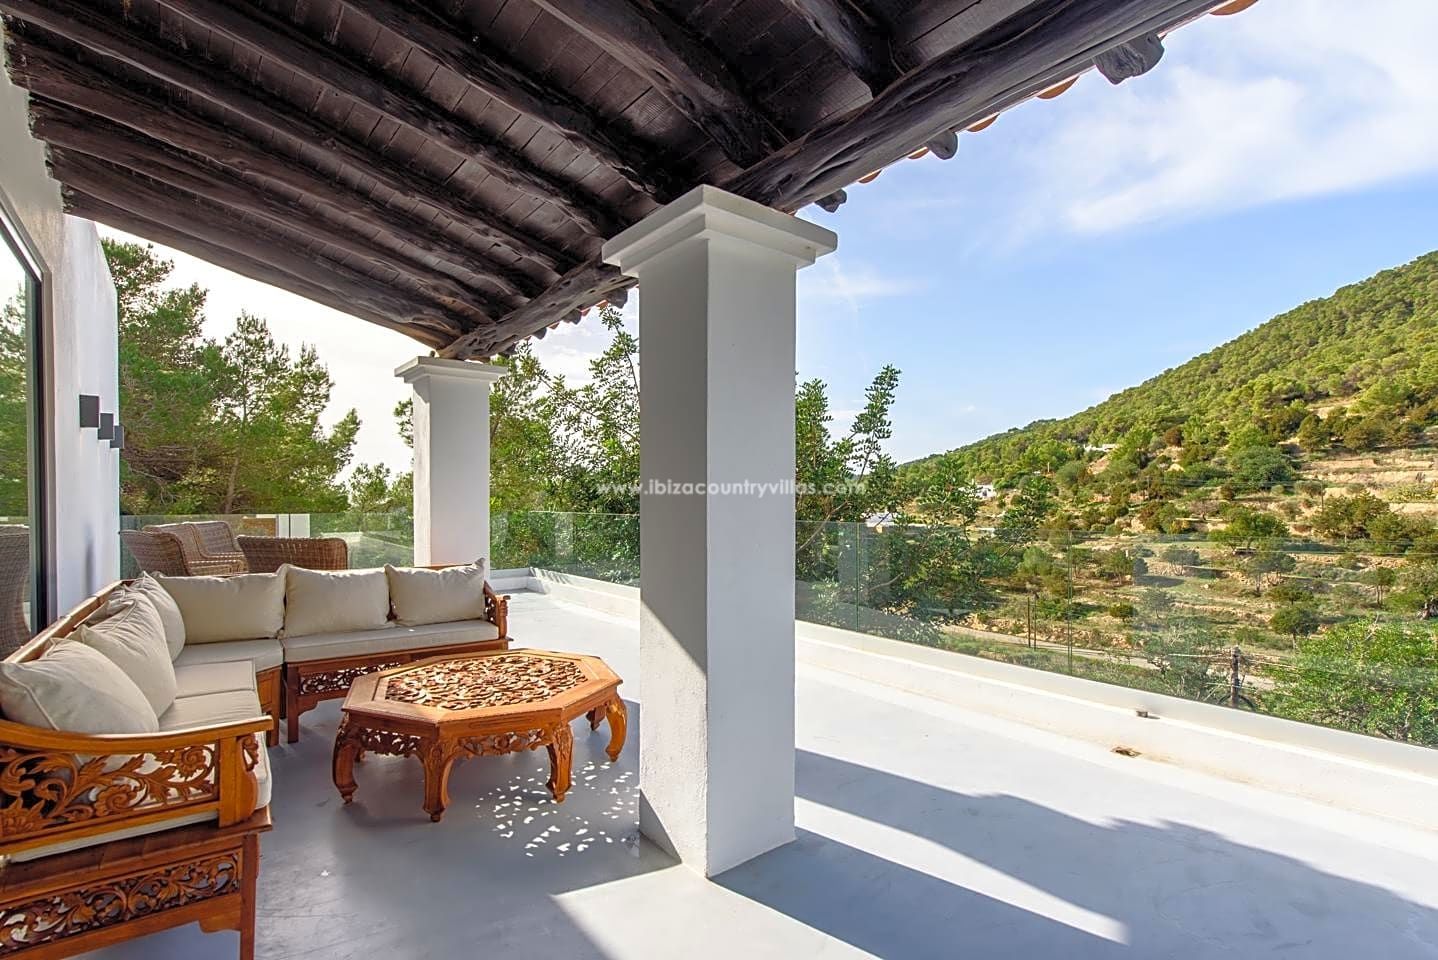 Beautiful and spacious villa in the countryside, Es Cubells